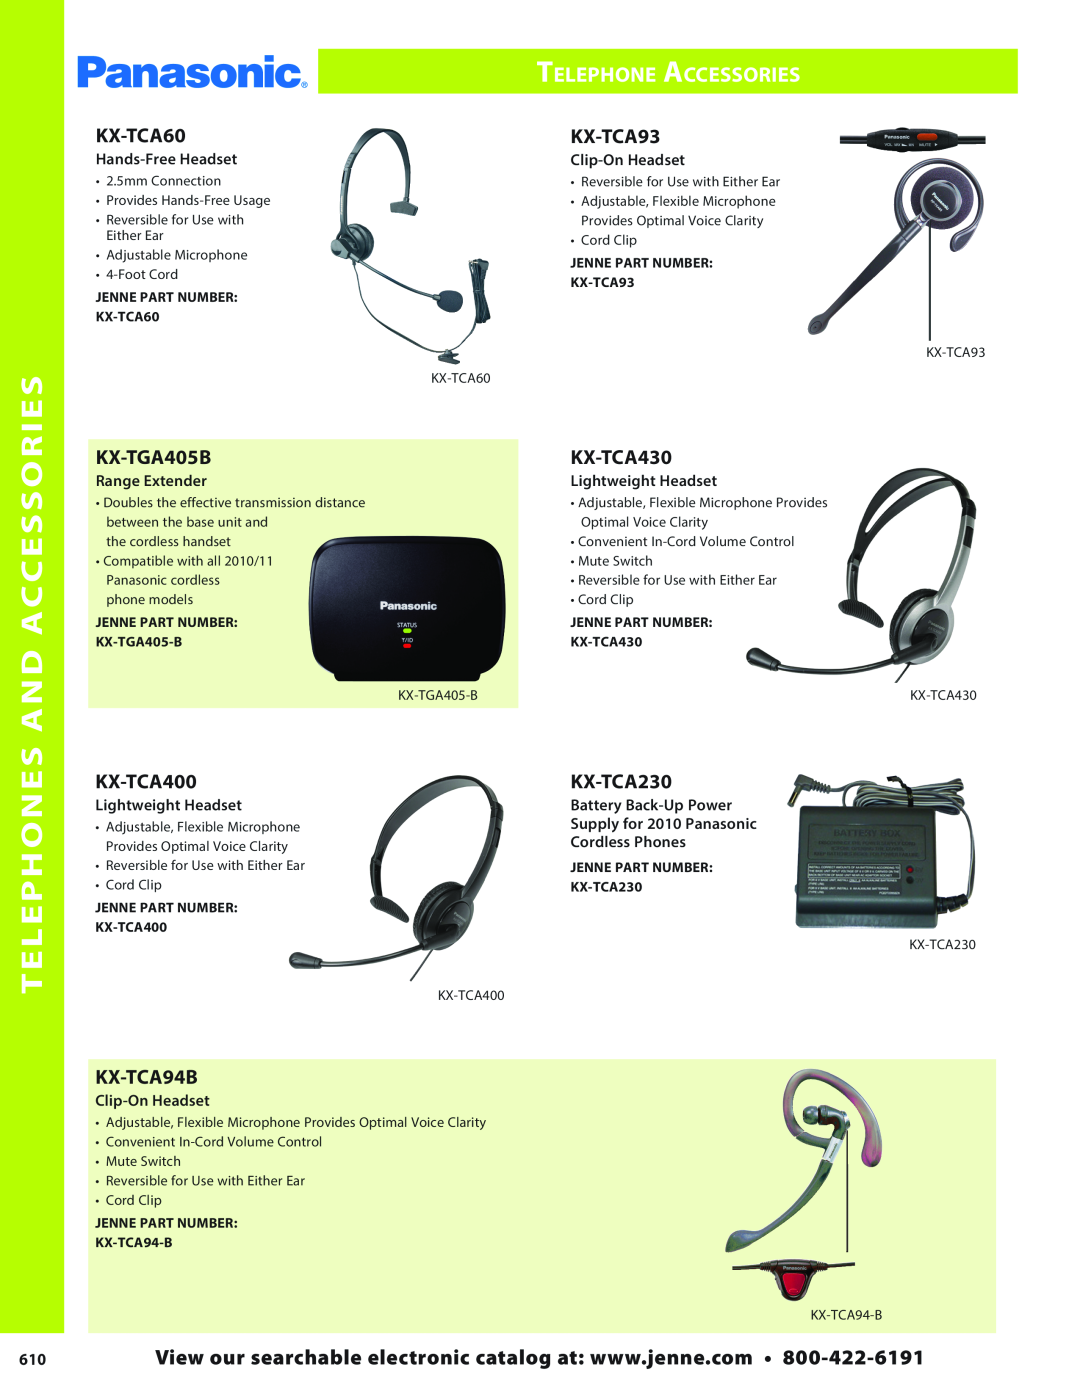 Panasonic PMPU2000 manual Telephone Accessories, Telephones And Accessories, KX-TCA230, Hands-FreeHeadset, Clip-OnHeadset 